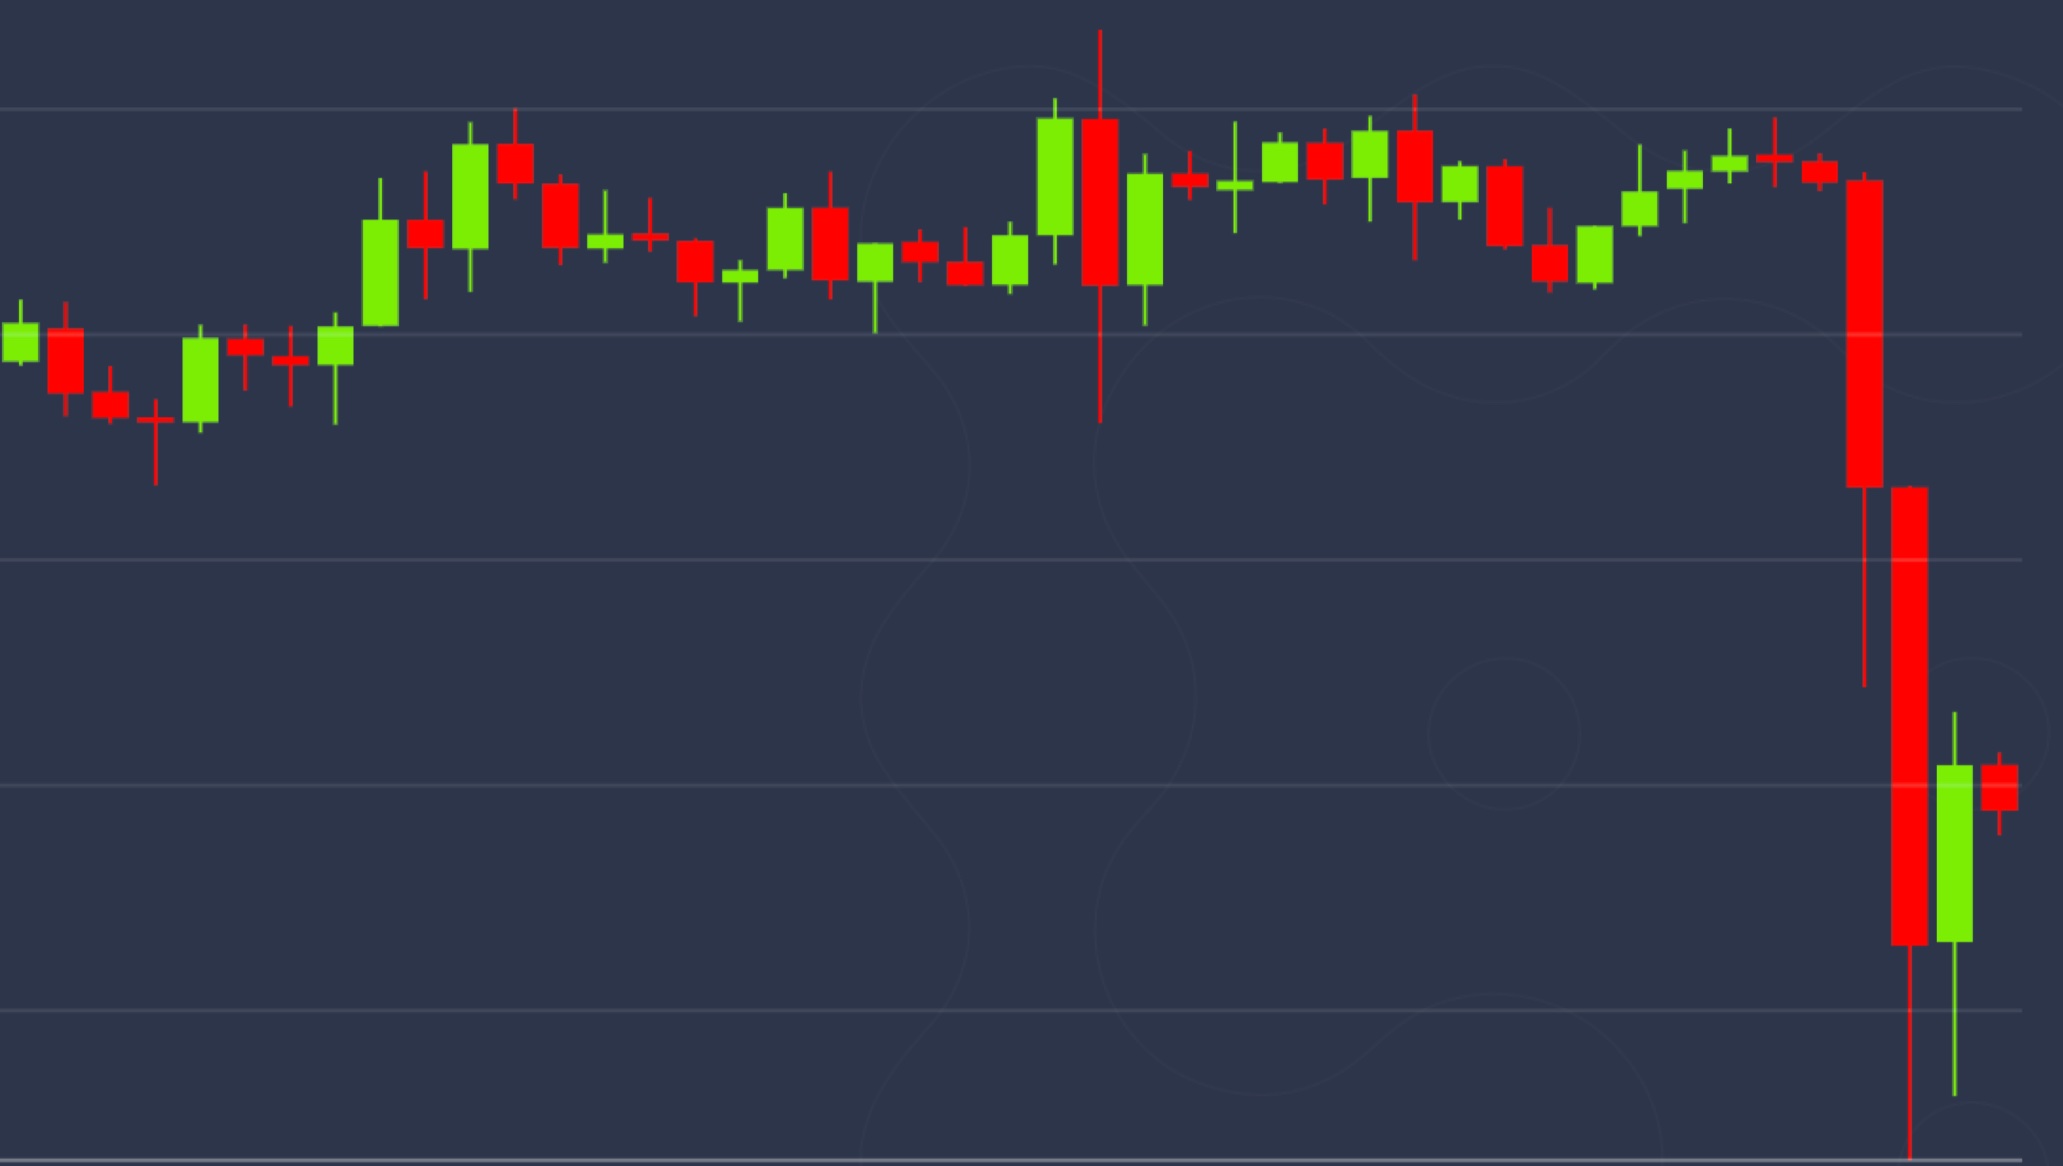 Price-drops-7%-in-an-hour-after-bitcoin-sees-a-ghost